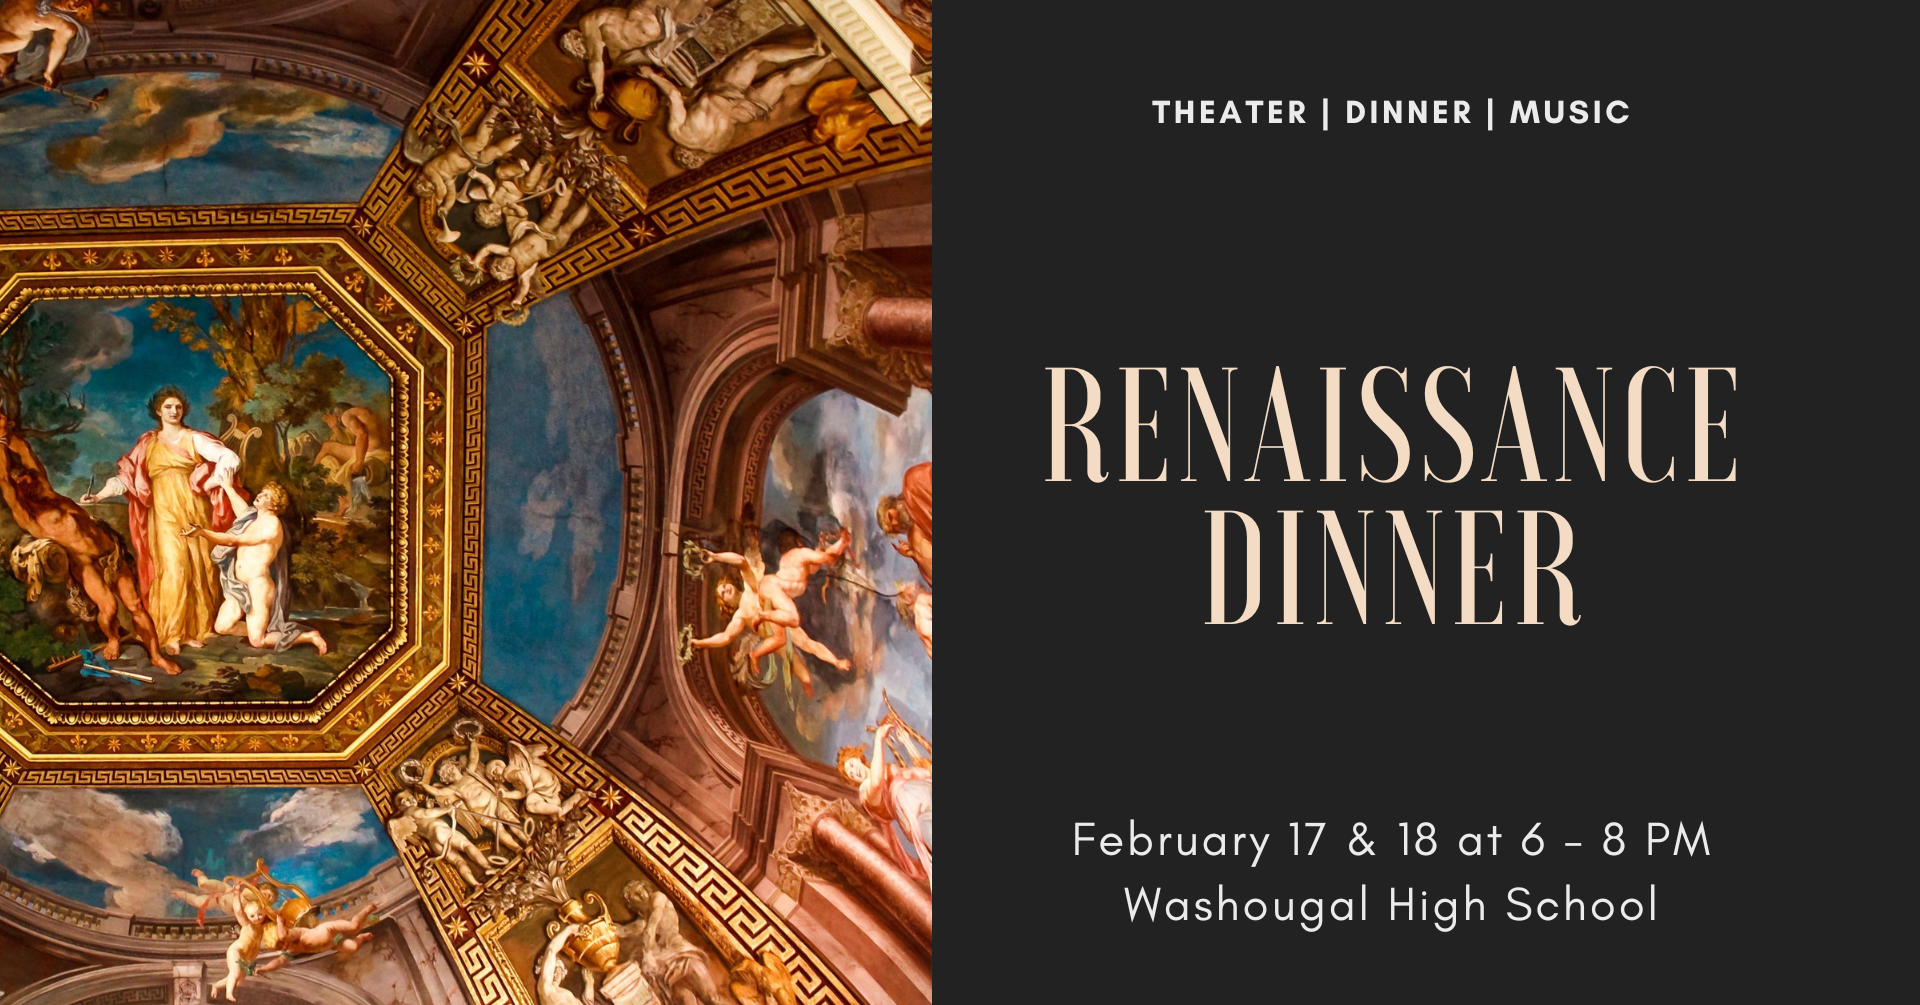 On left, image of renaissance painting. on right, text reads "Renaissance Dinner"